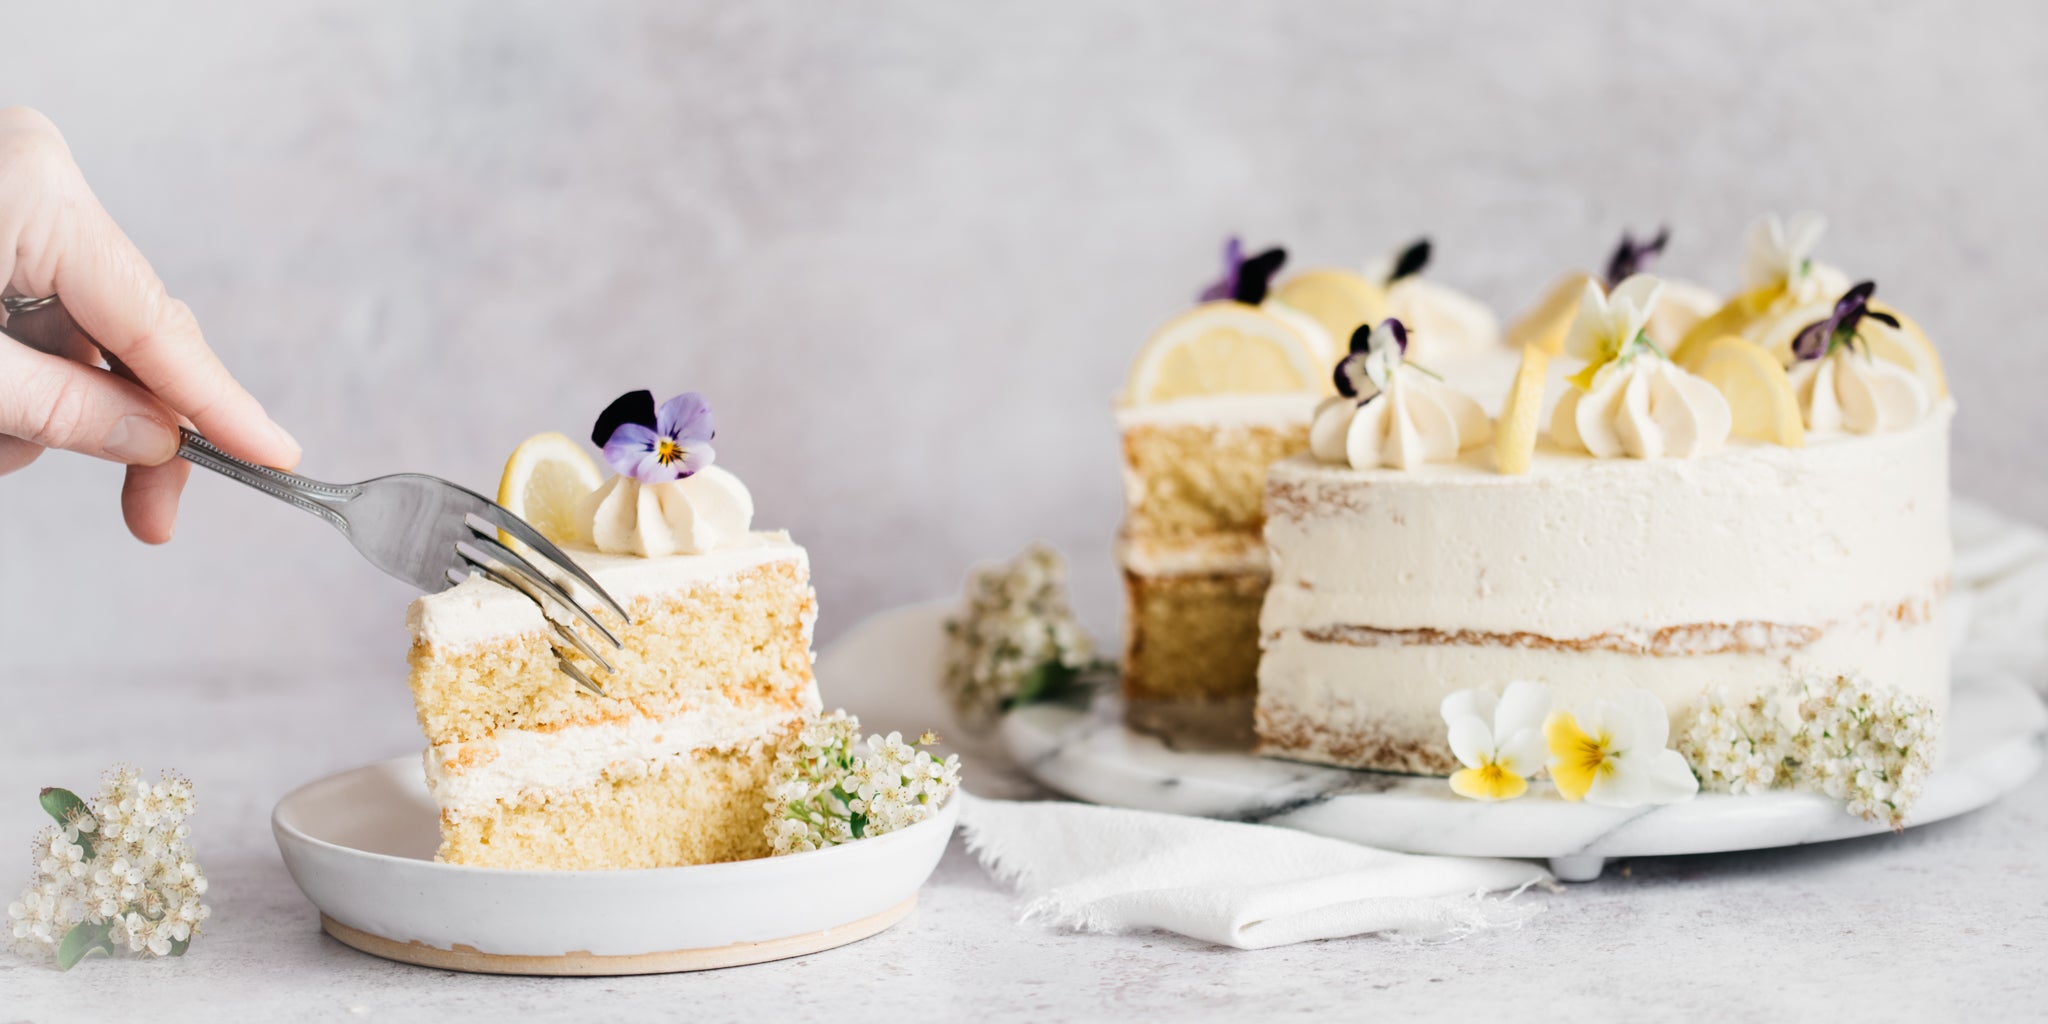 Sponge cake decorated with flowers with a slice removed and on a white plate in the foreground. Hand reaching in to take a bite of the slice